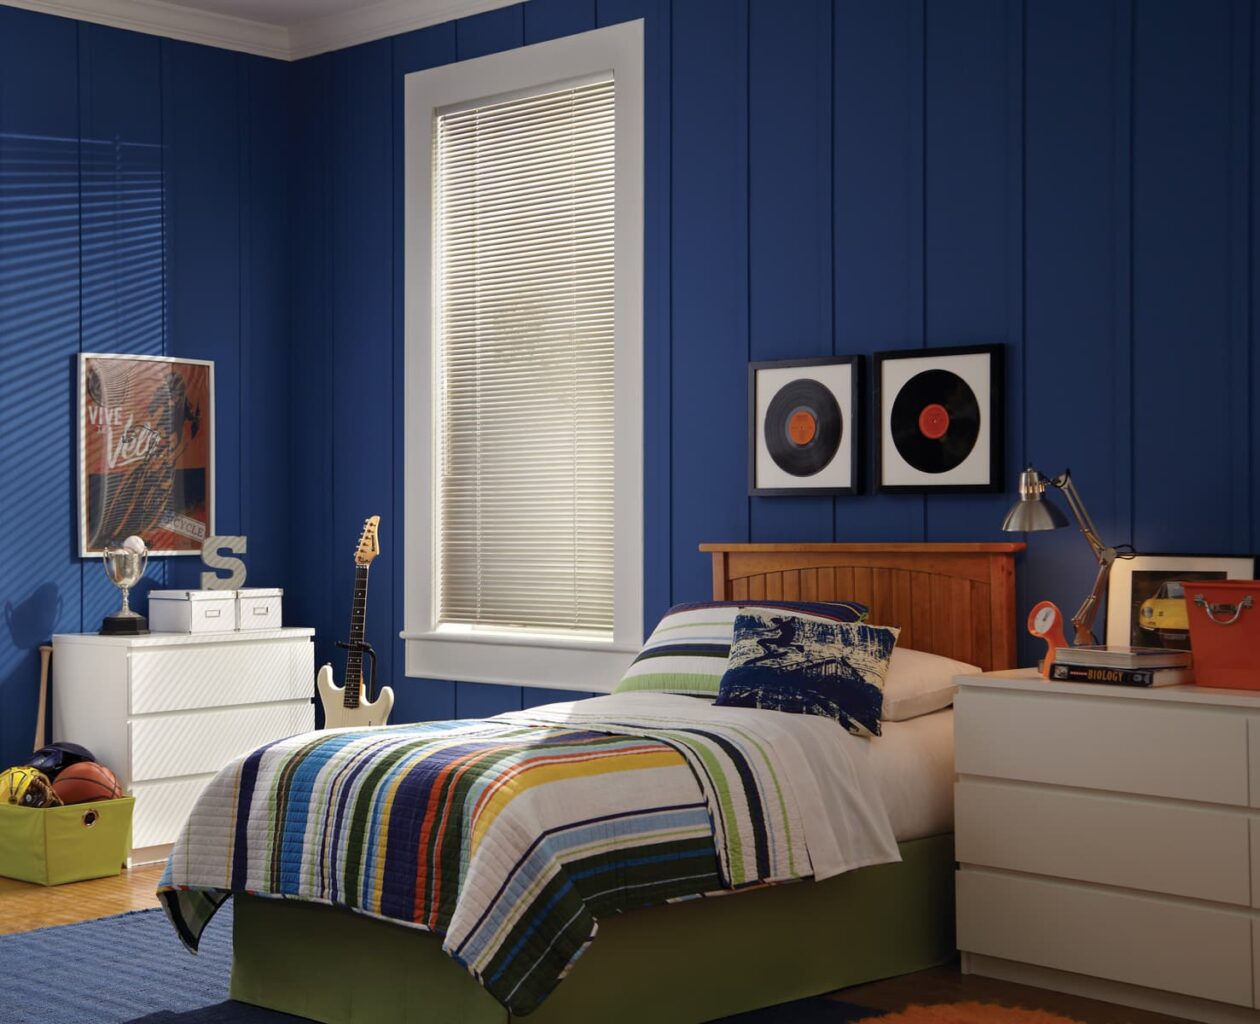 aluminum blinds in a child's bedroom